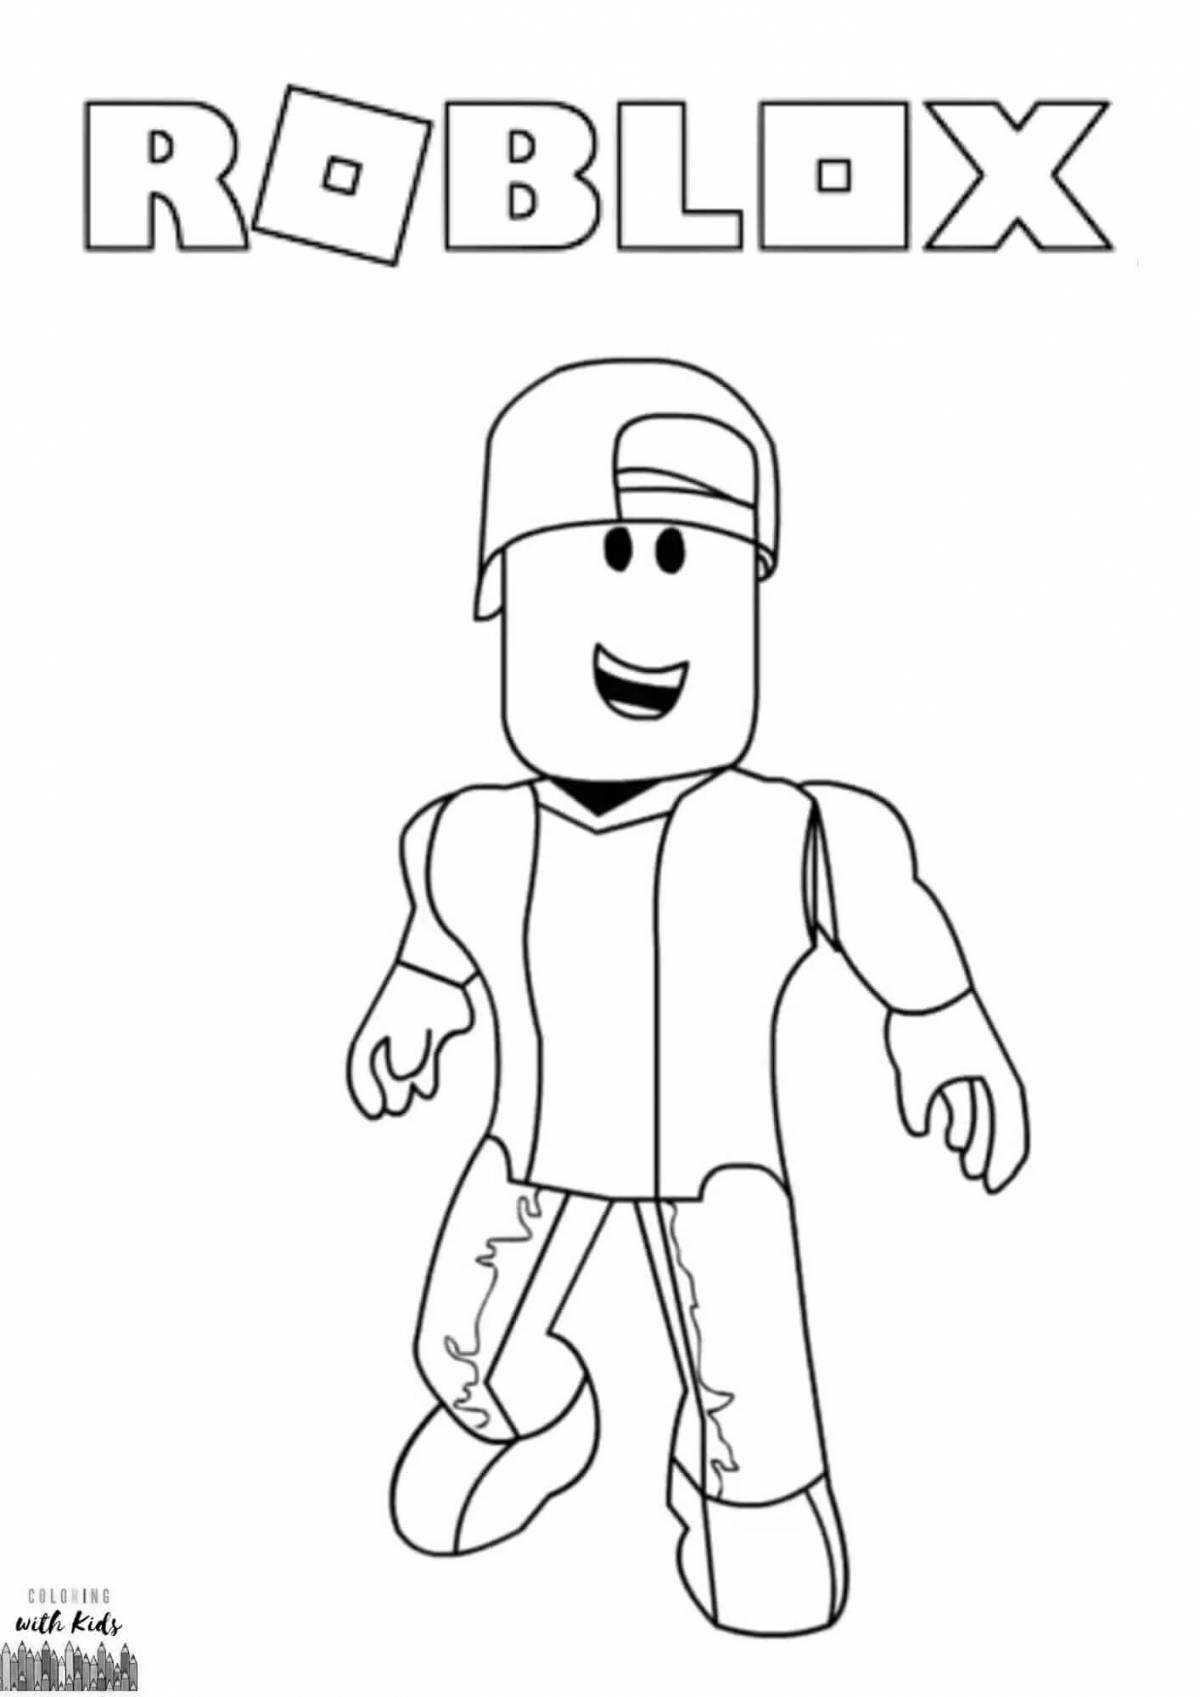 Coloring animated roblox avatar